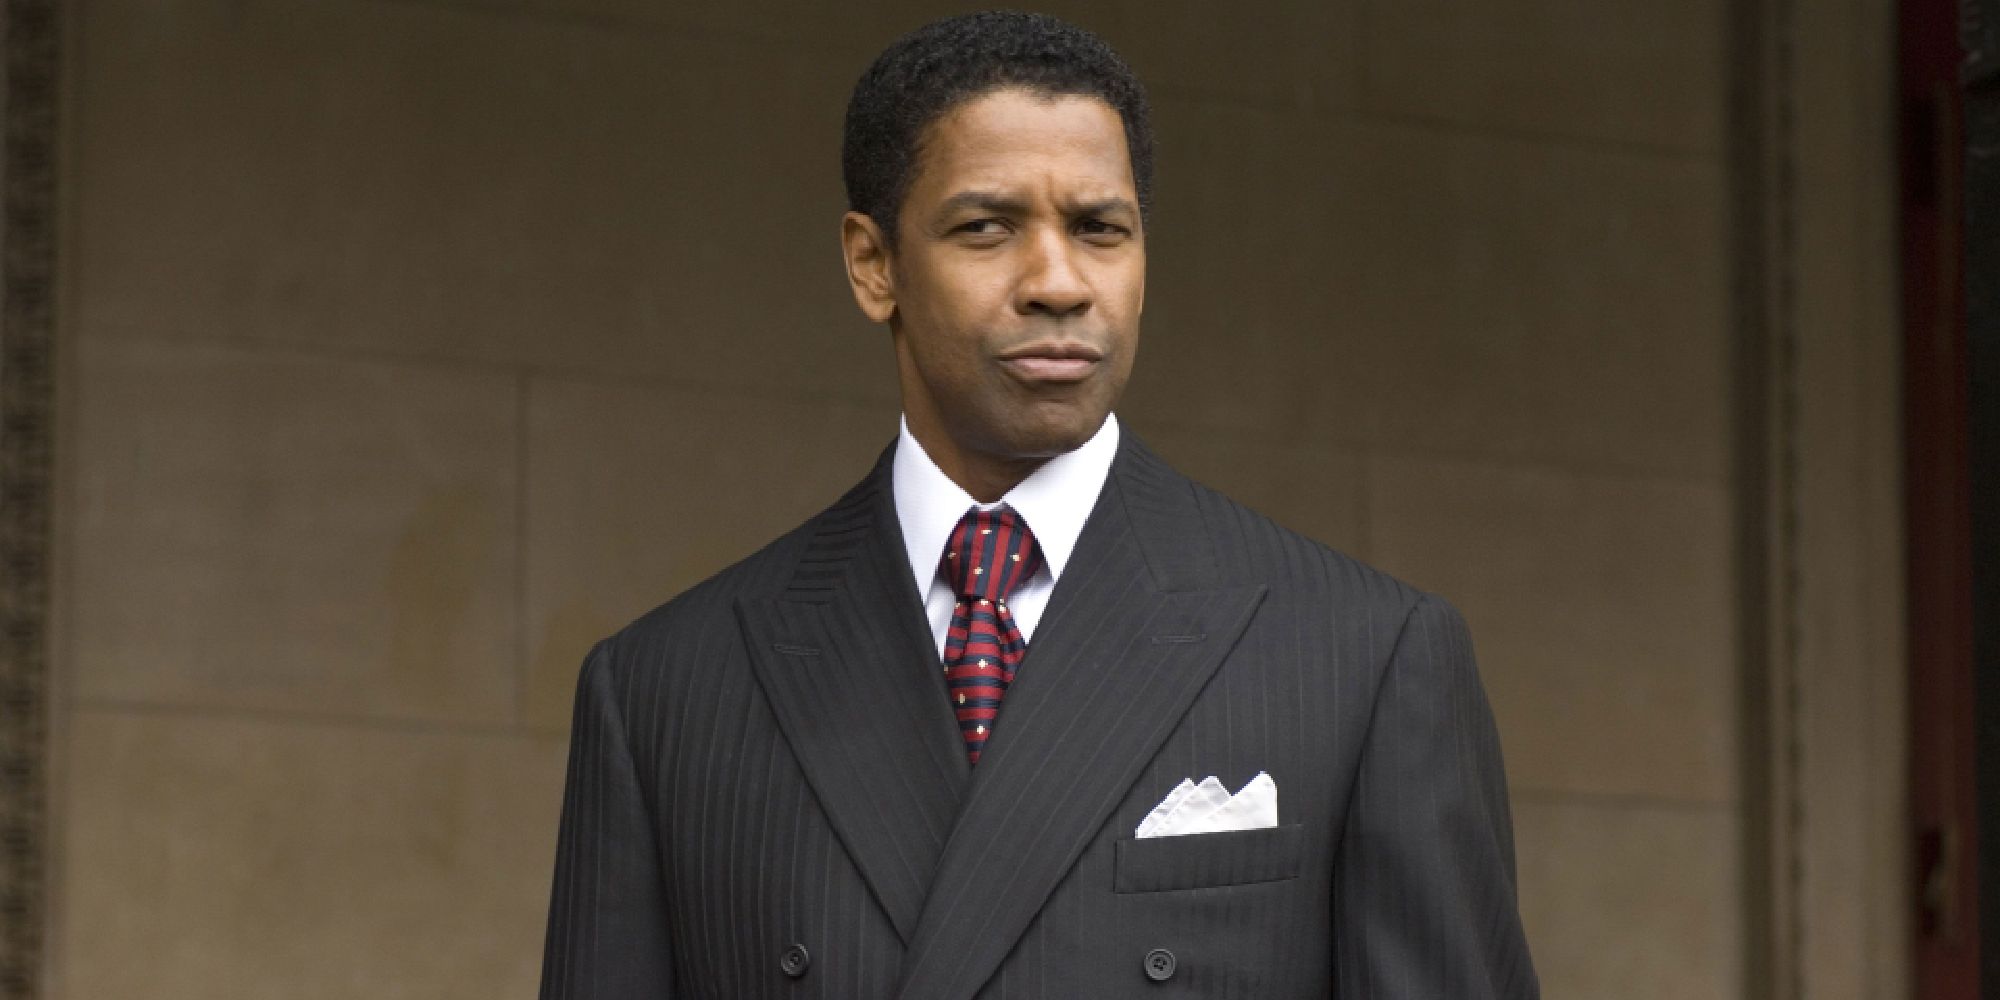 Denzel Washington as Frank Lucas smirking while looking intently in American Gangster